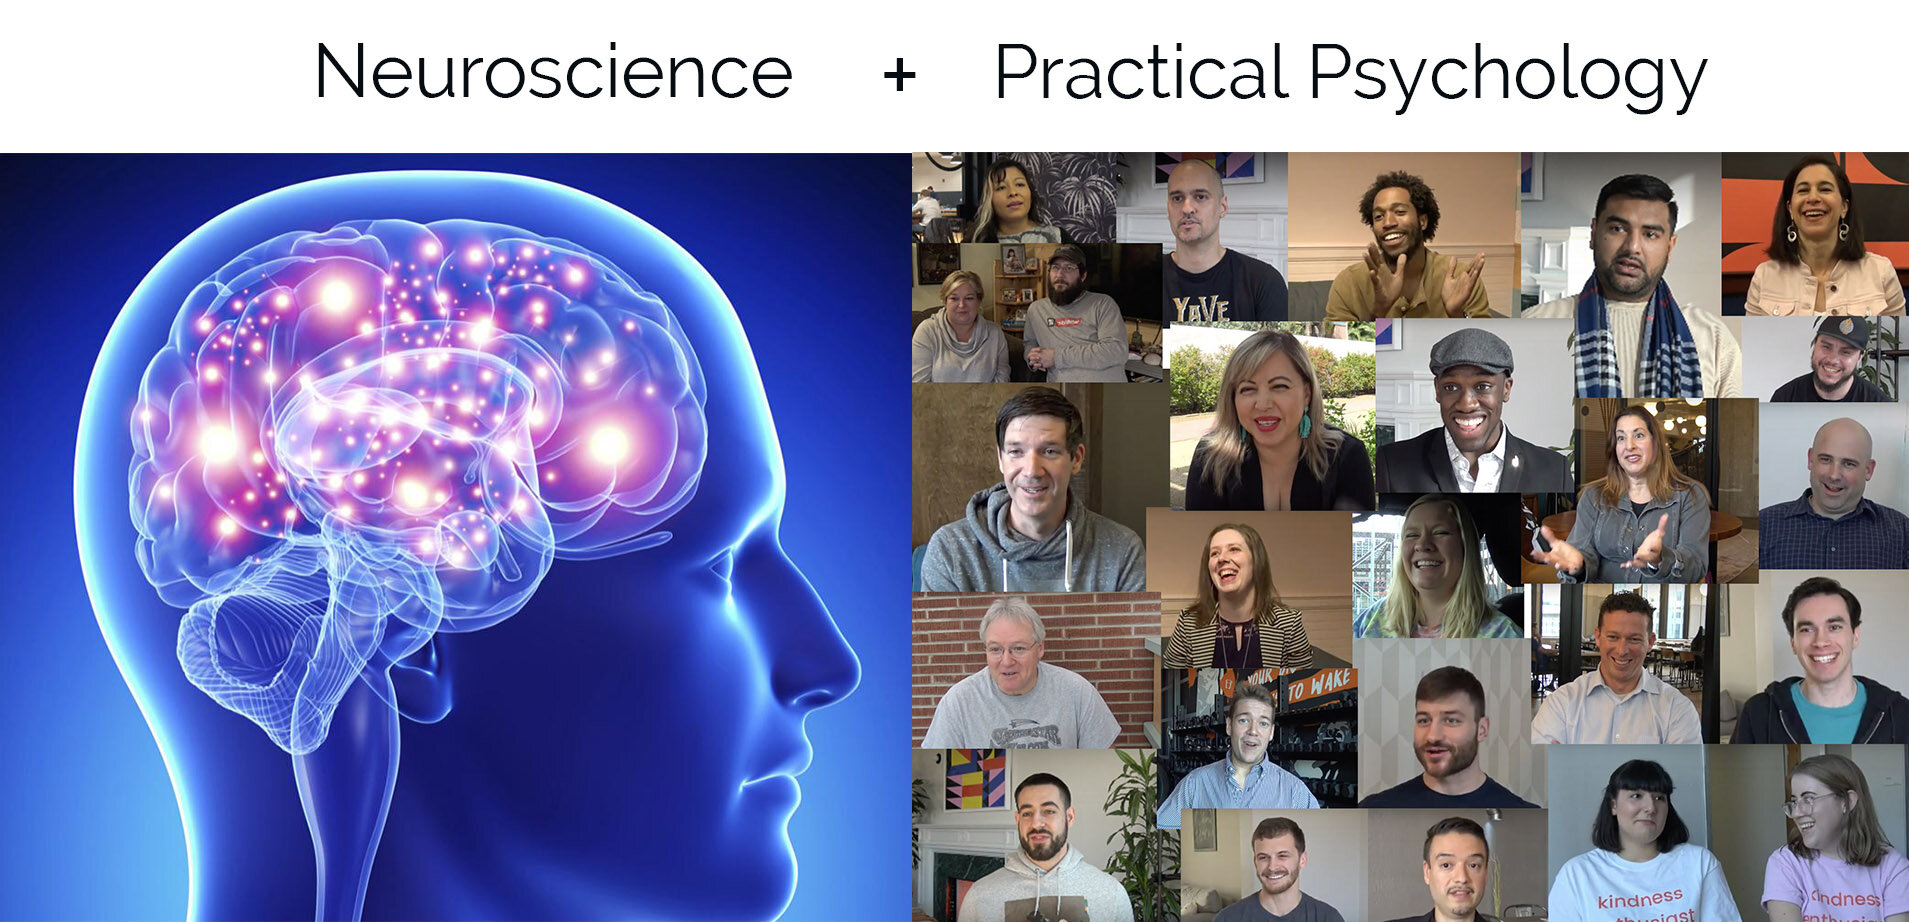 Each virtual workshop combines our practical psychology research across the USA + simple neuroscience of how the brain is wired — so that your team walks away energized with tangible takeaways they can implement immediately.